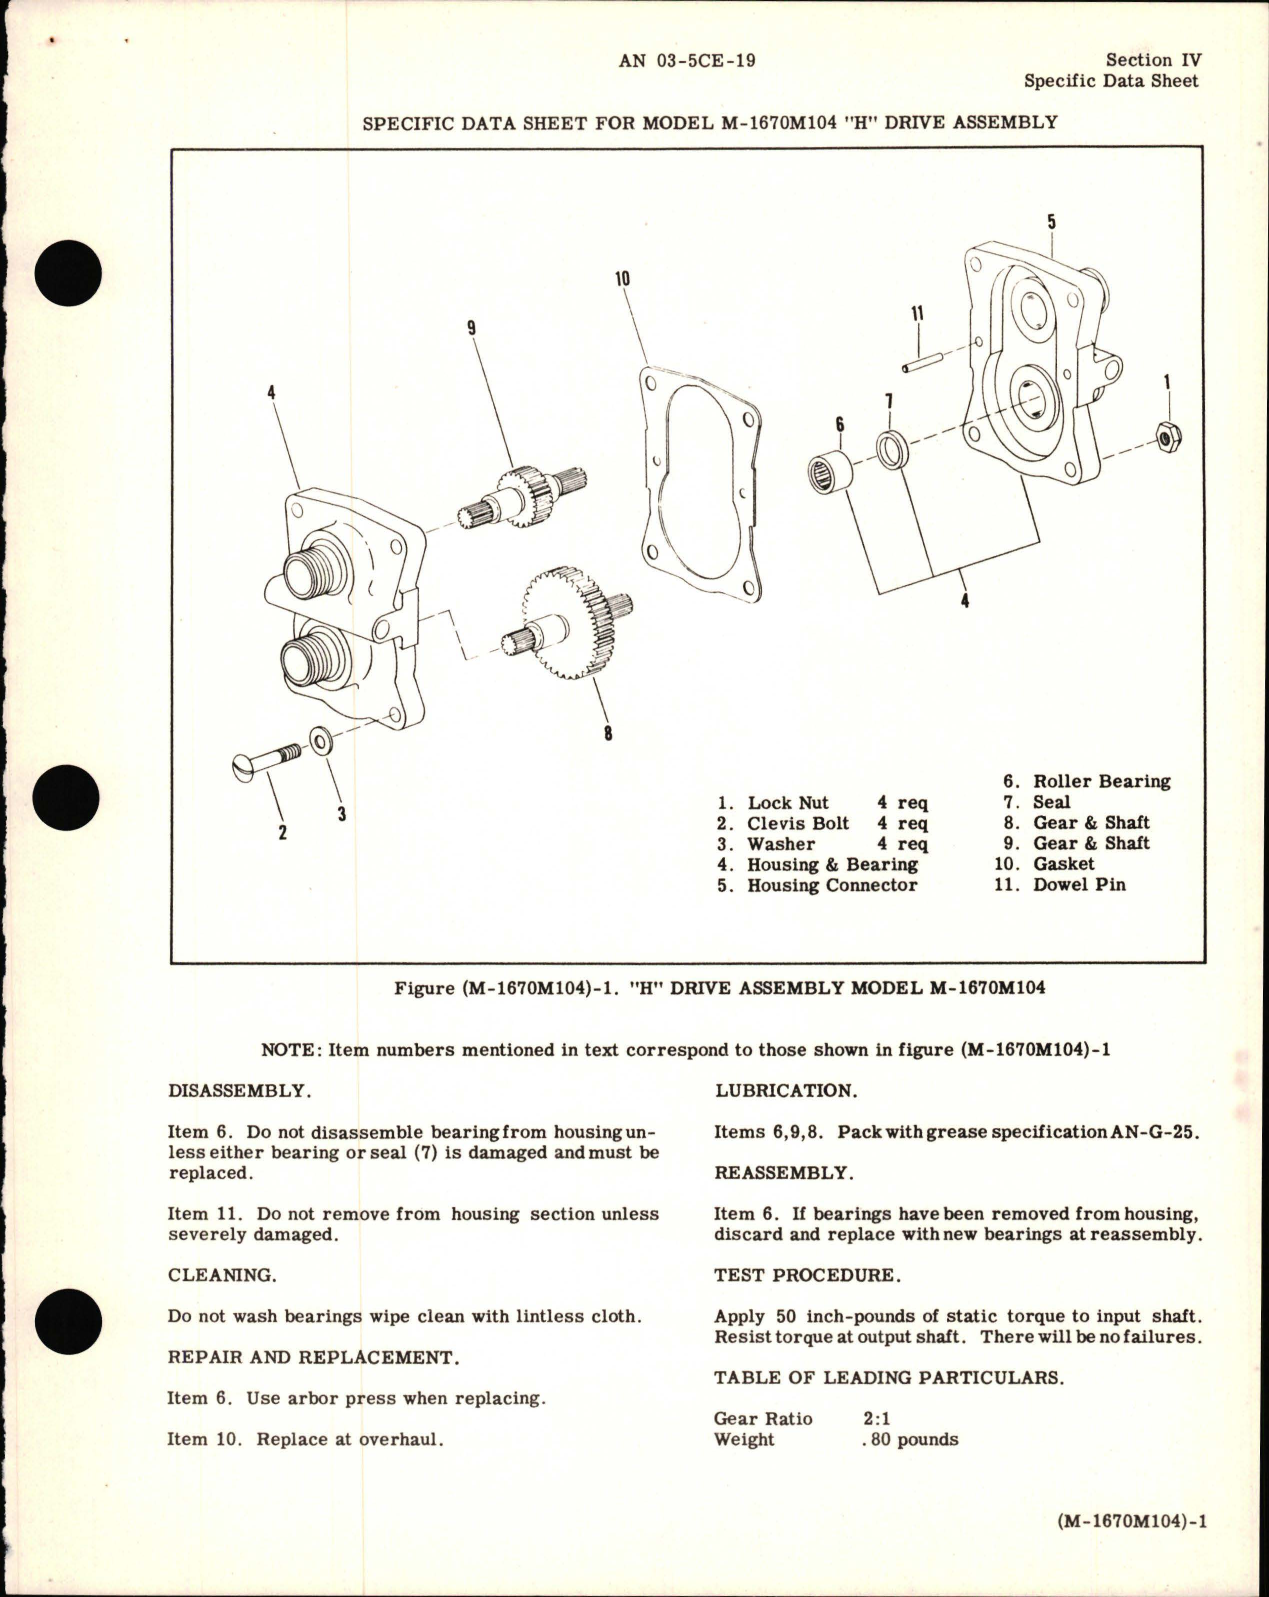 Sample page 7 from AirCorps Library document: Overhaul Instructions for Gear Box and Drive Assemblies